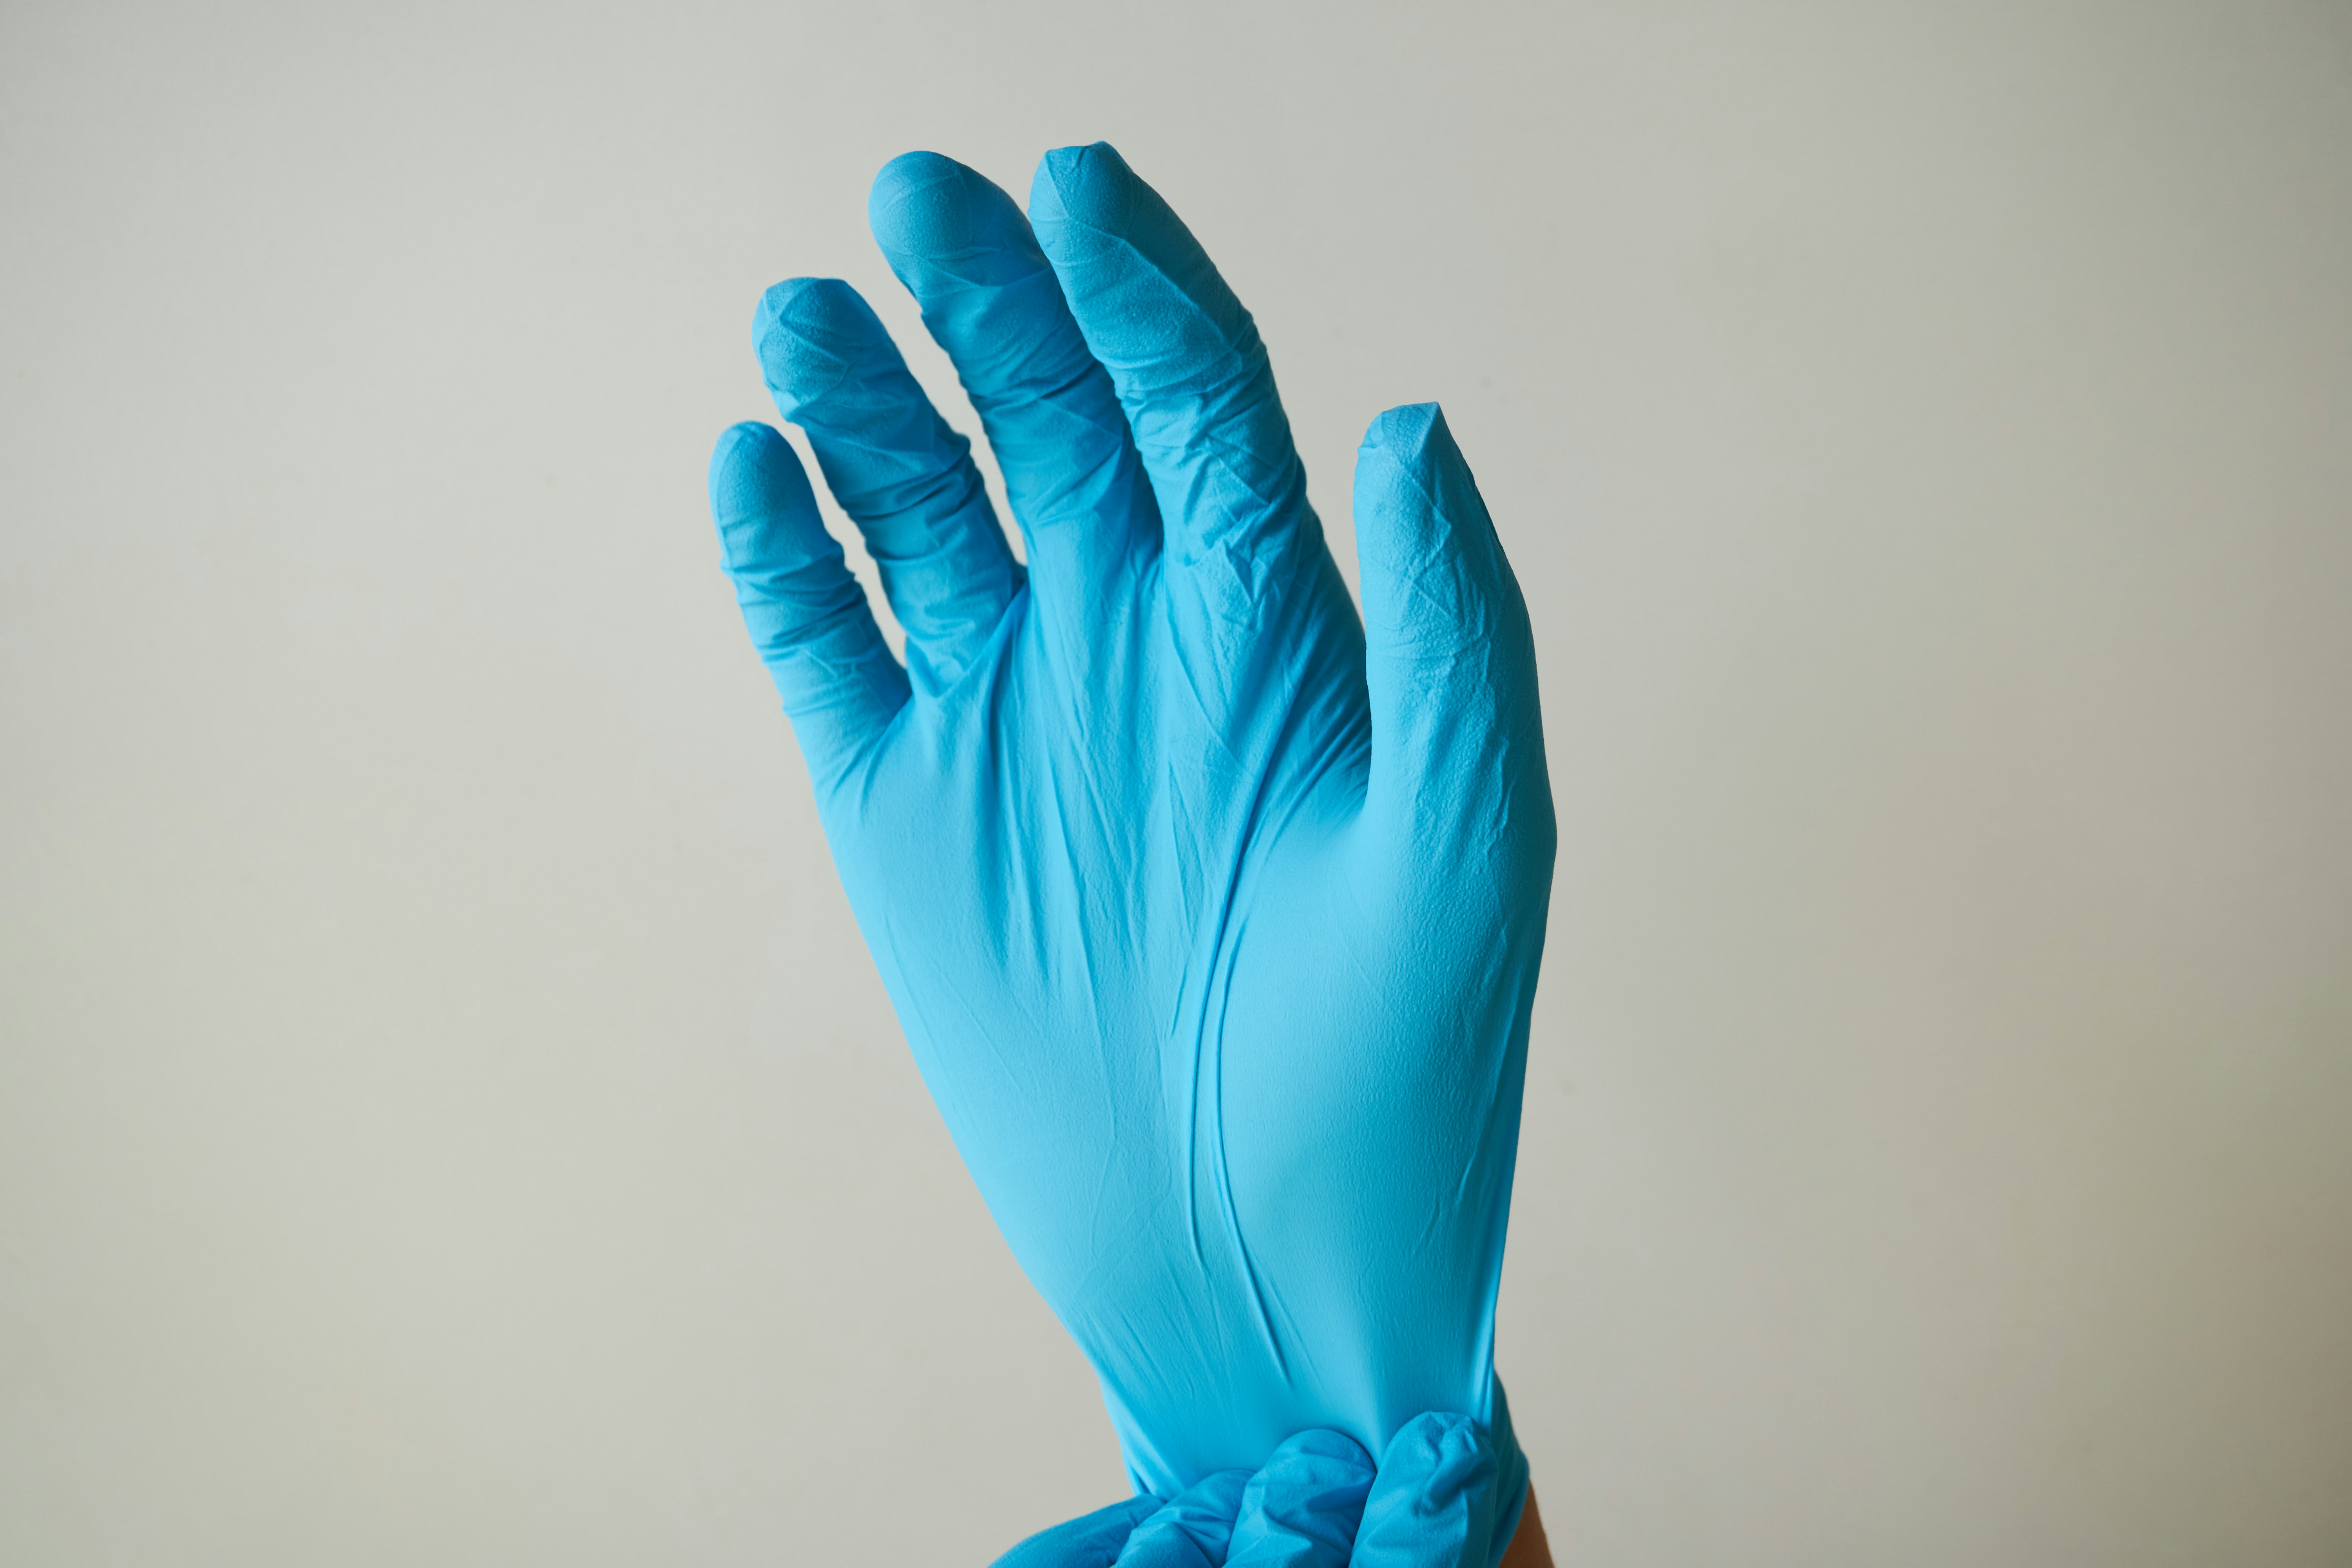 right hand in blue rubber glove